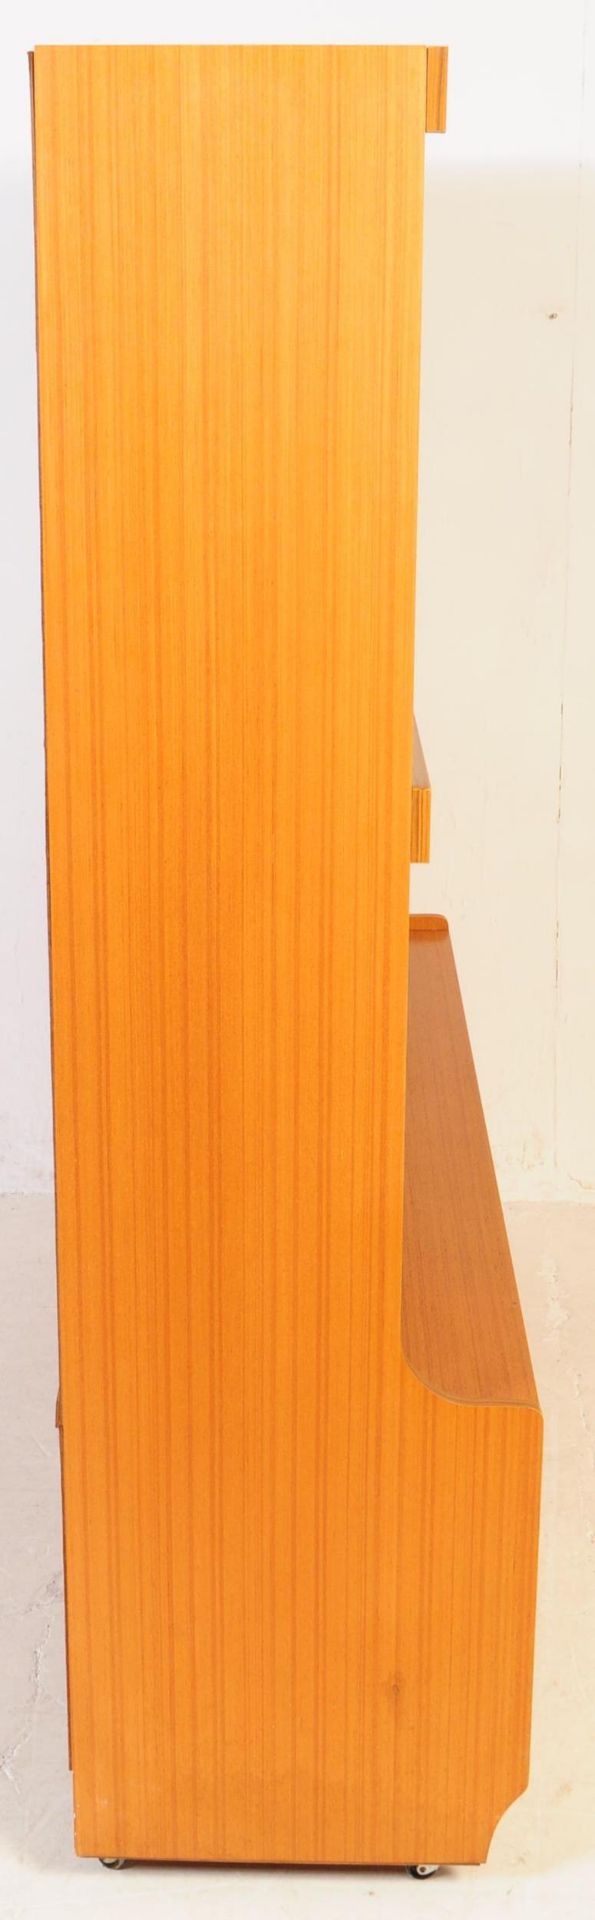 RETRO 1970S TEAK EFFECT SIDEBOARD BY STATEROOM - Image 5 of 7